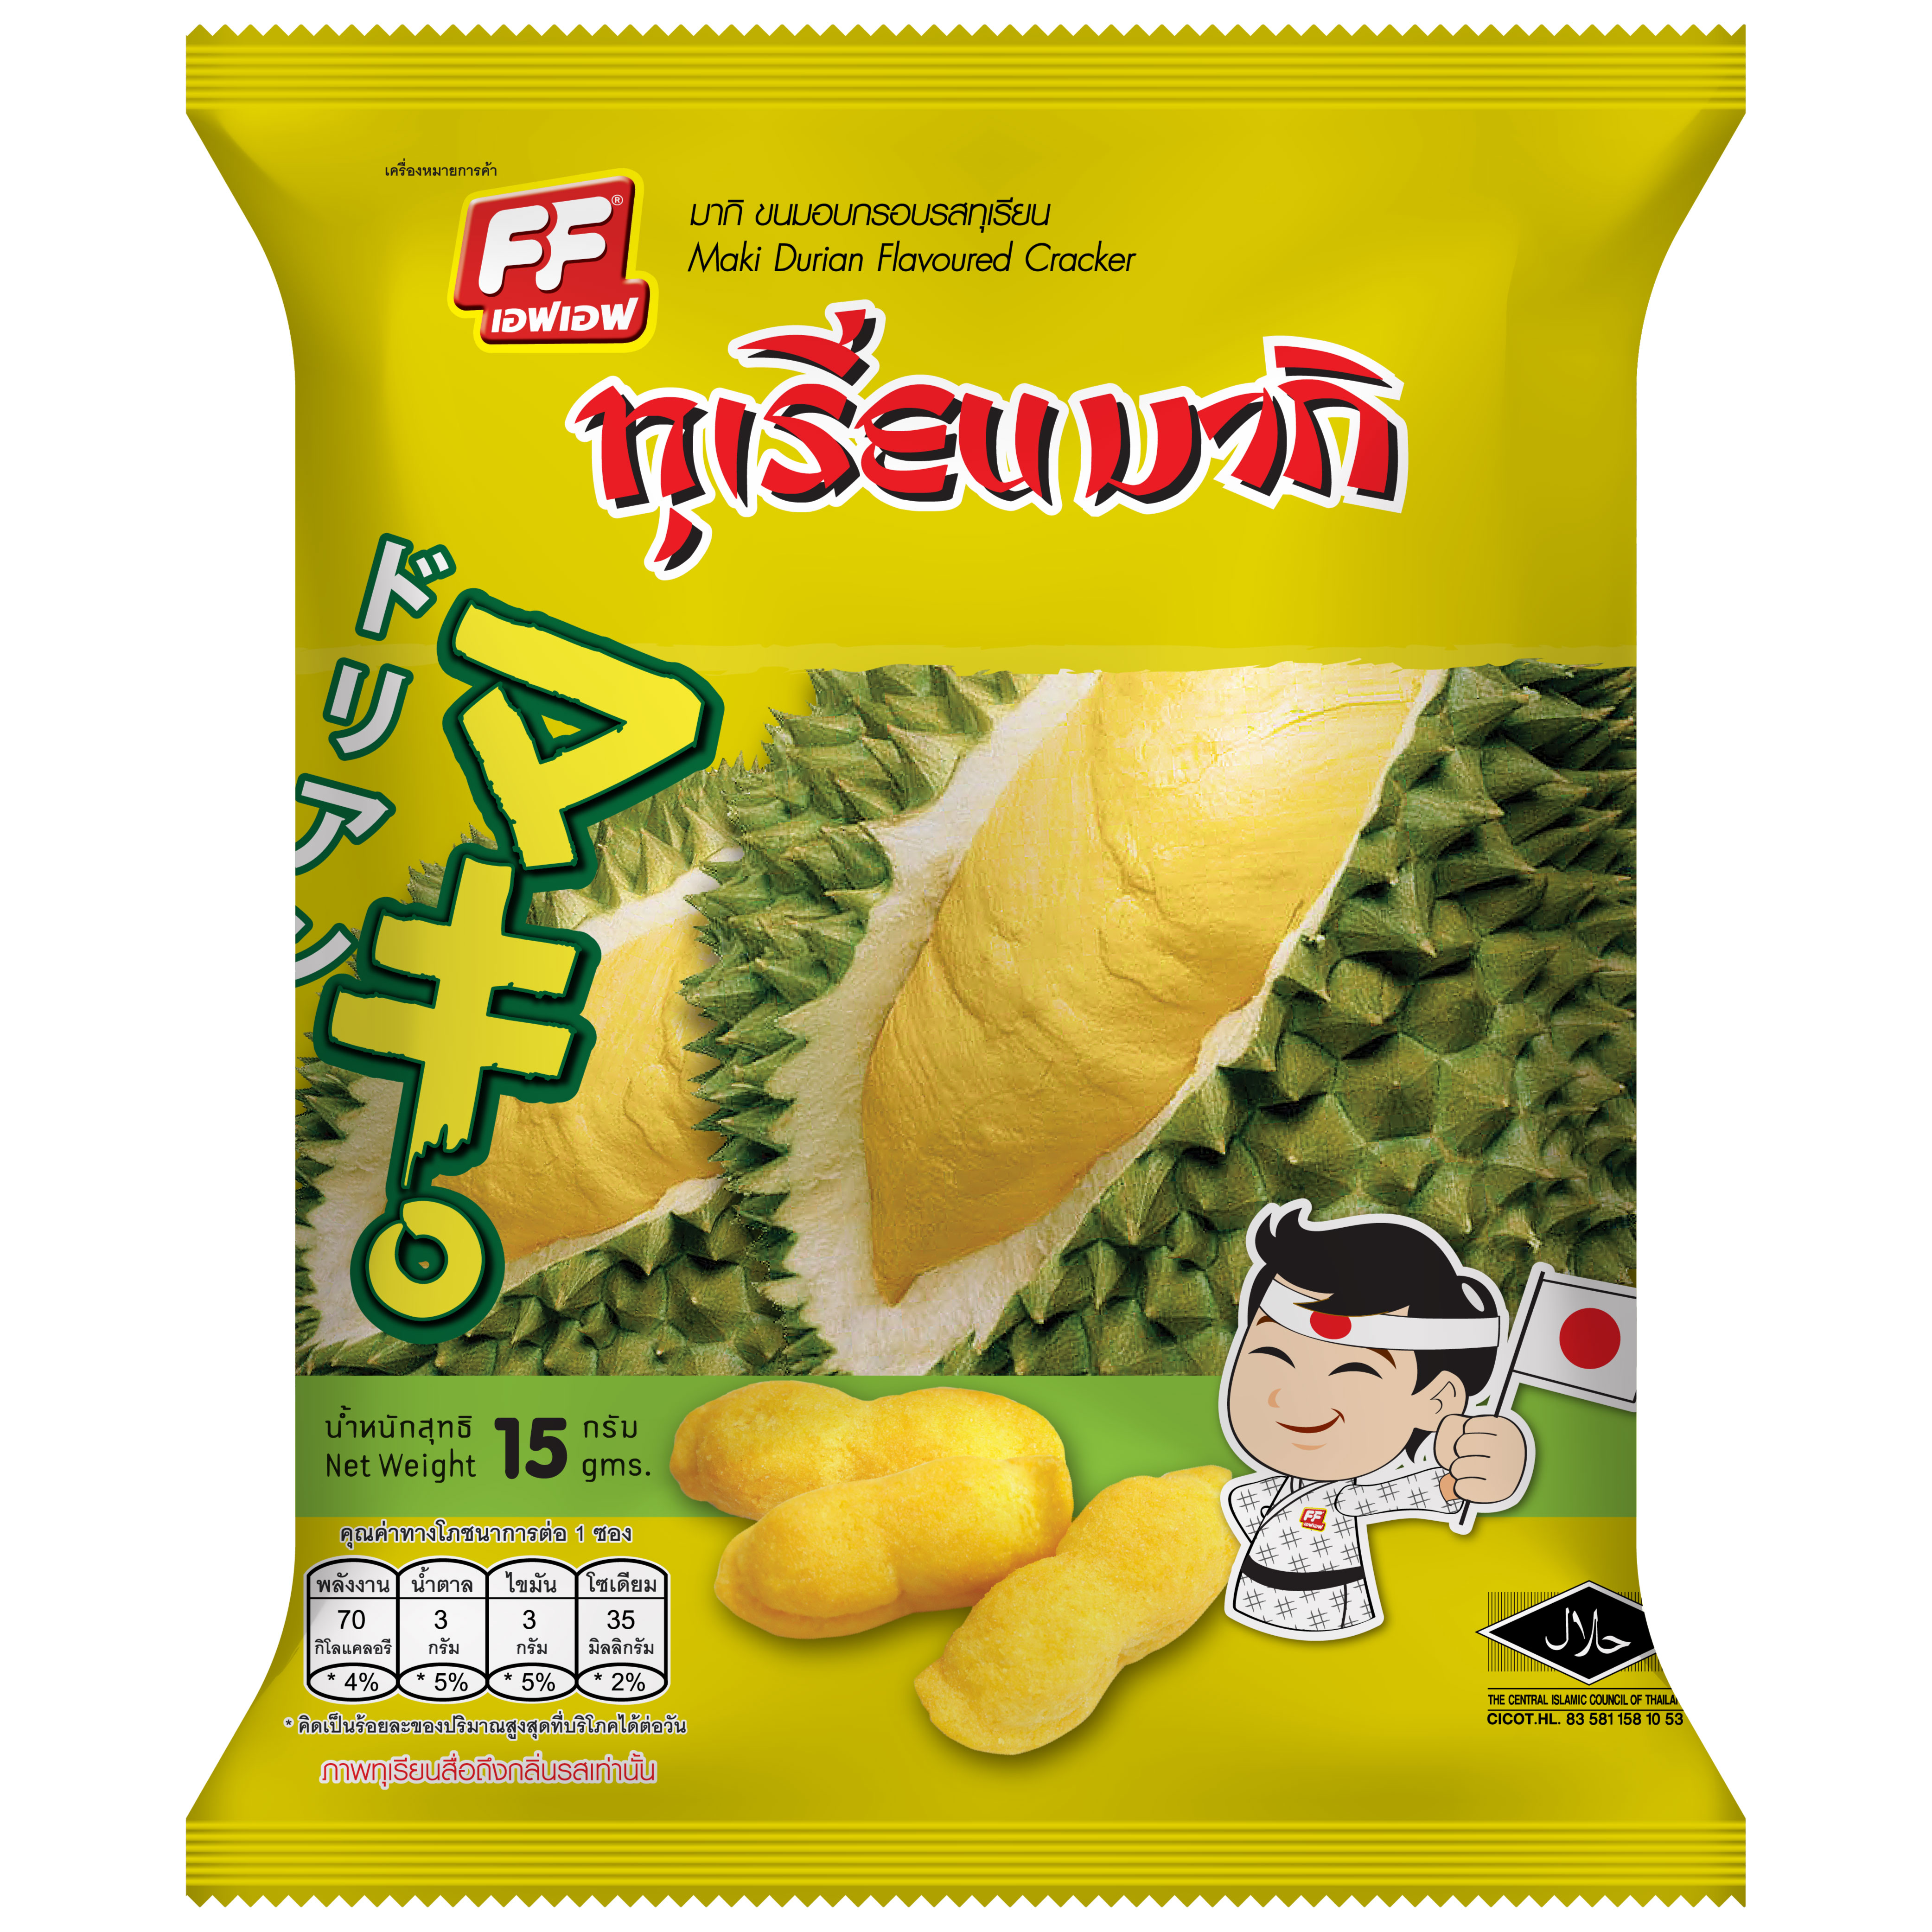 FF Durian Flavoured